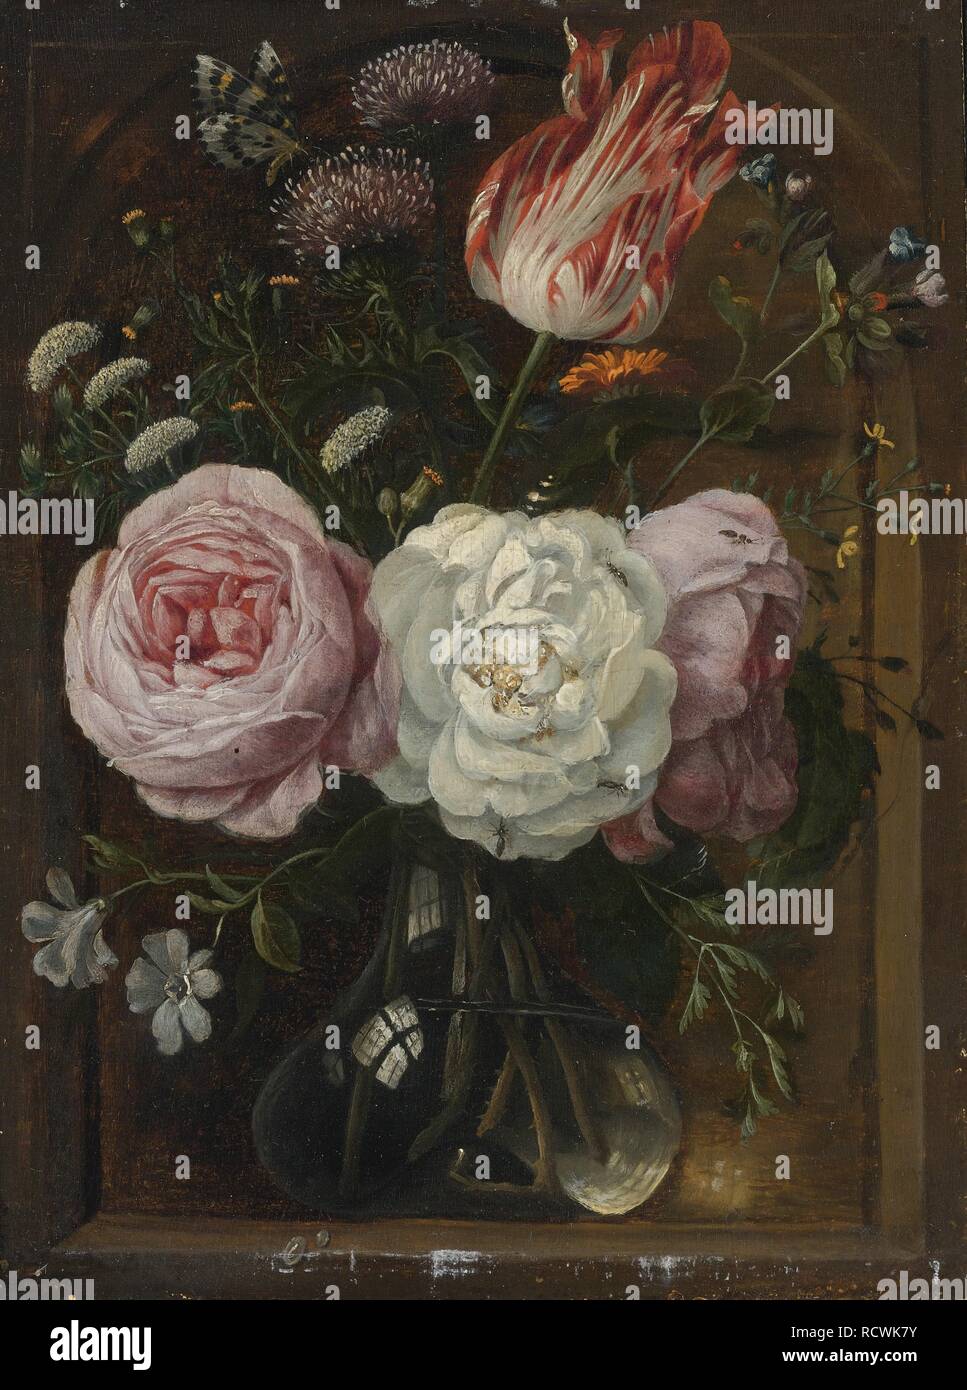 Flower still life with a tulip and roses in a glass vase. Museum: PRIVATE COLLECTION. Author: HEEM, JAN DAVIDSZ DE. Stock Photo